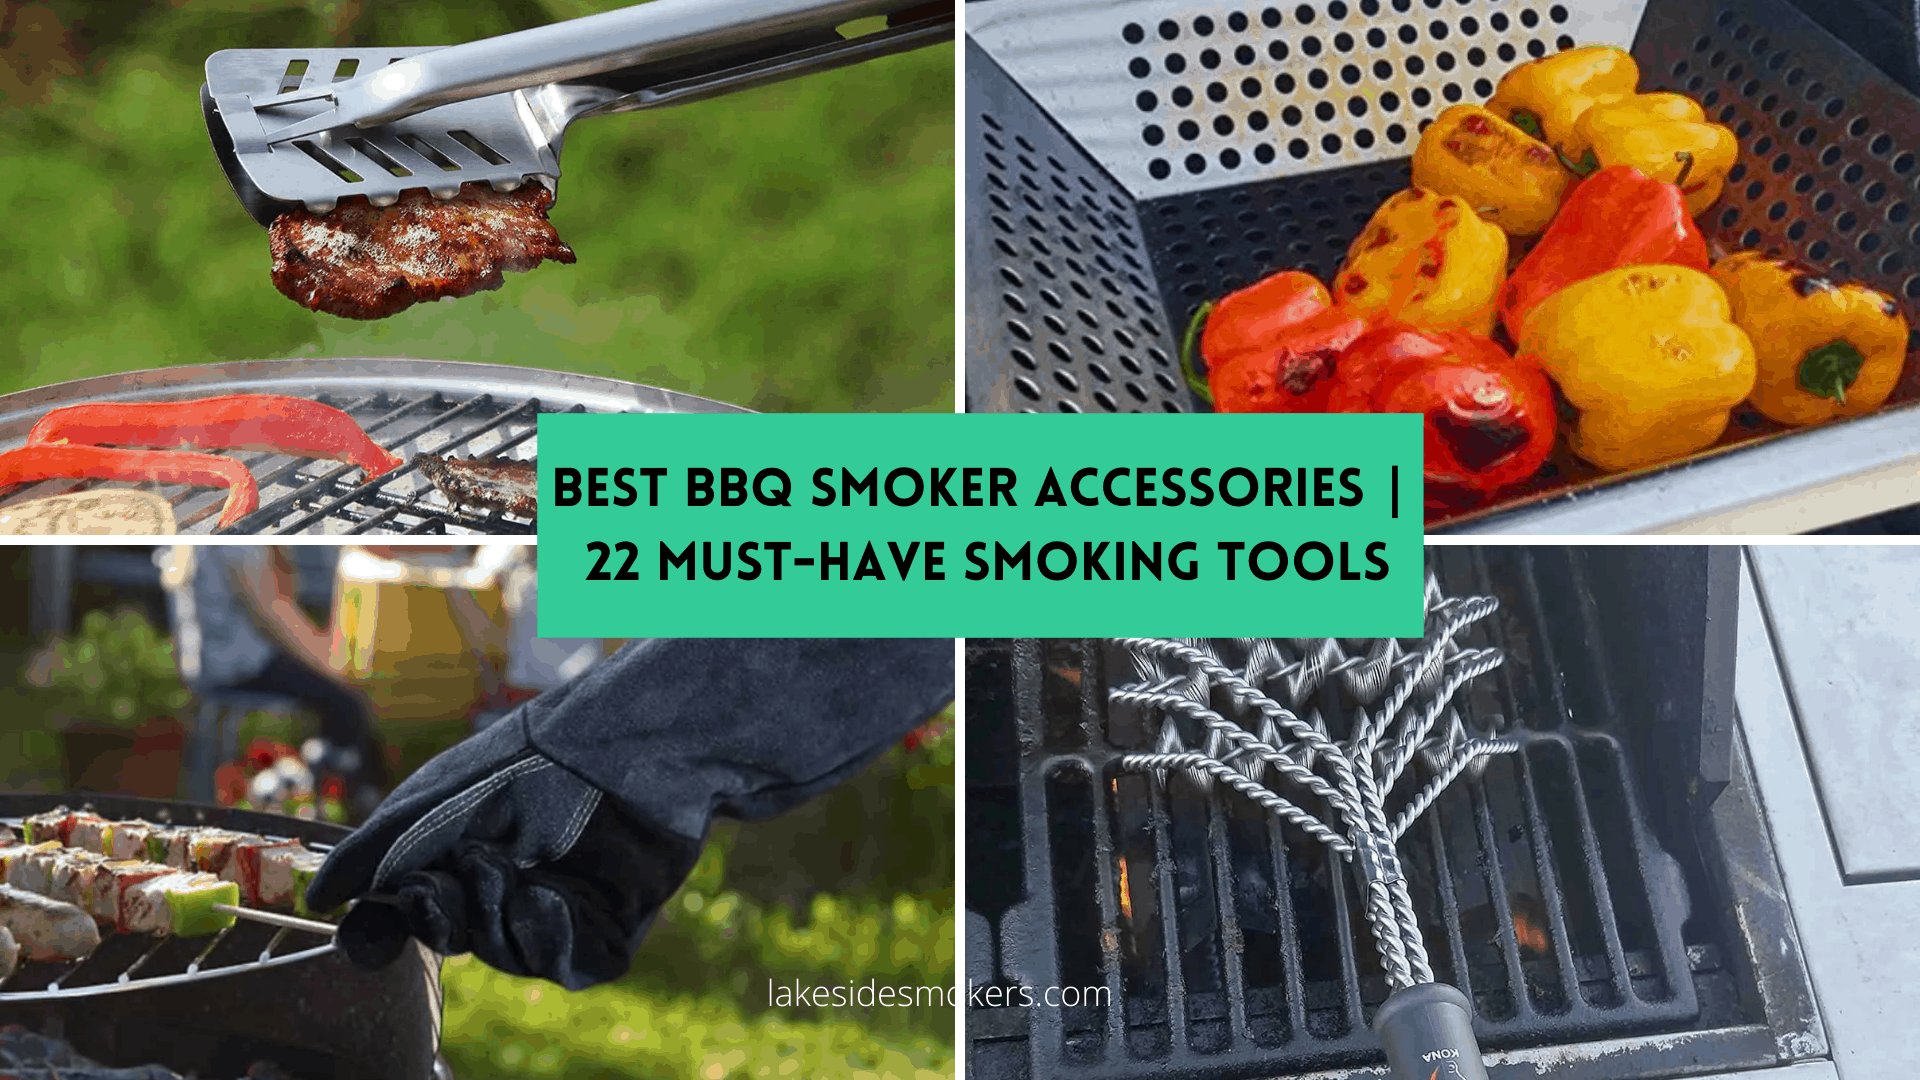 https://www.lakesidesmokers.com/wp-content/uploads/2021/06/Best-BBQ-smoker-accessories-22-must-have-smoking-tools.png